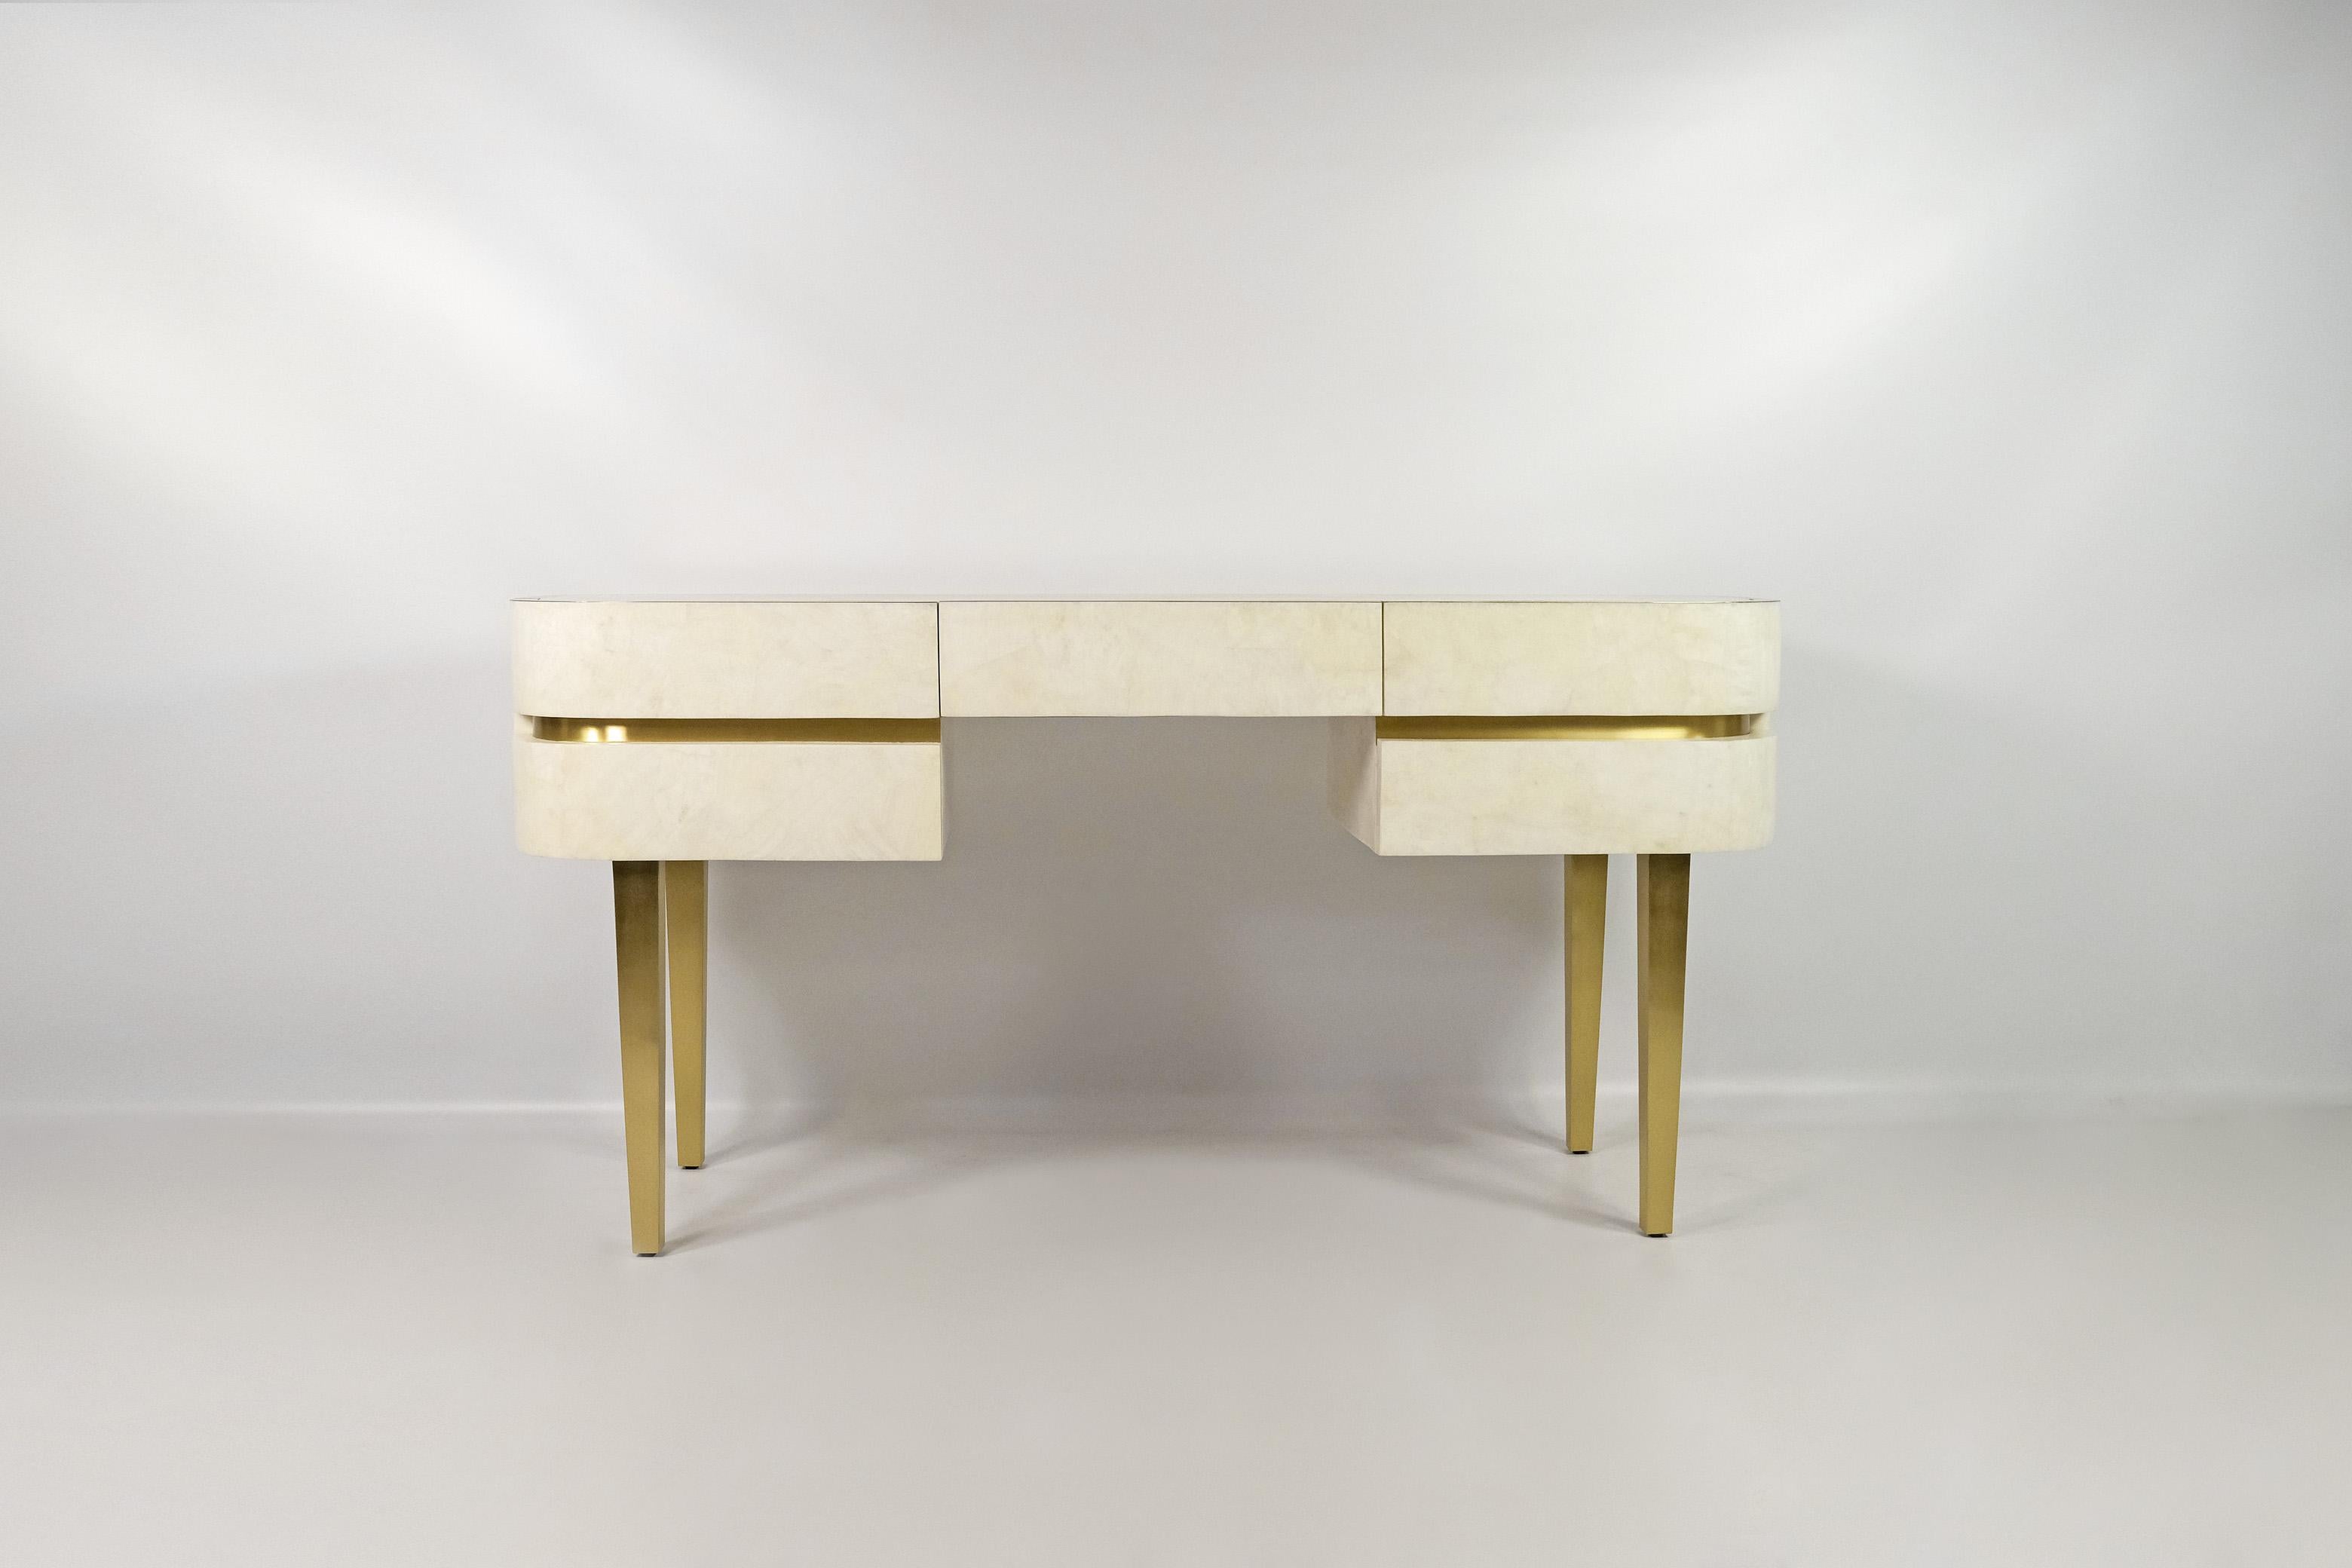 This dressing table has 4 drawers and it is made of white rock crystal marquetry with brass trims.
The 4 feet are in brass.

2 drawers on the right side, 1 drawer in the center and 1 higher drawer on the left side.

The interior is in light oak